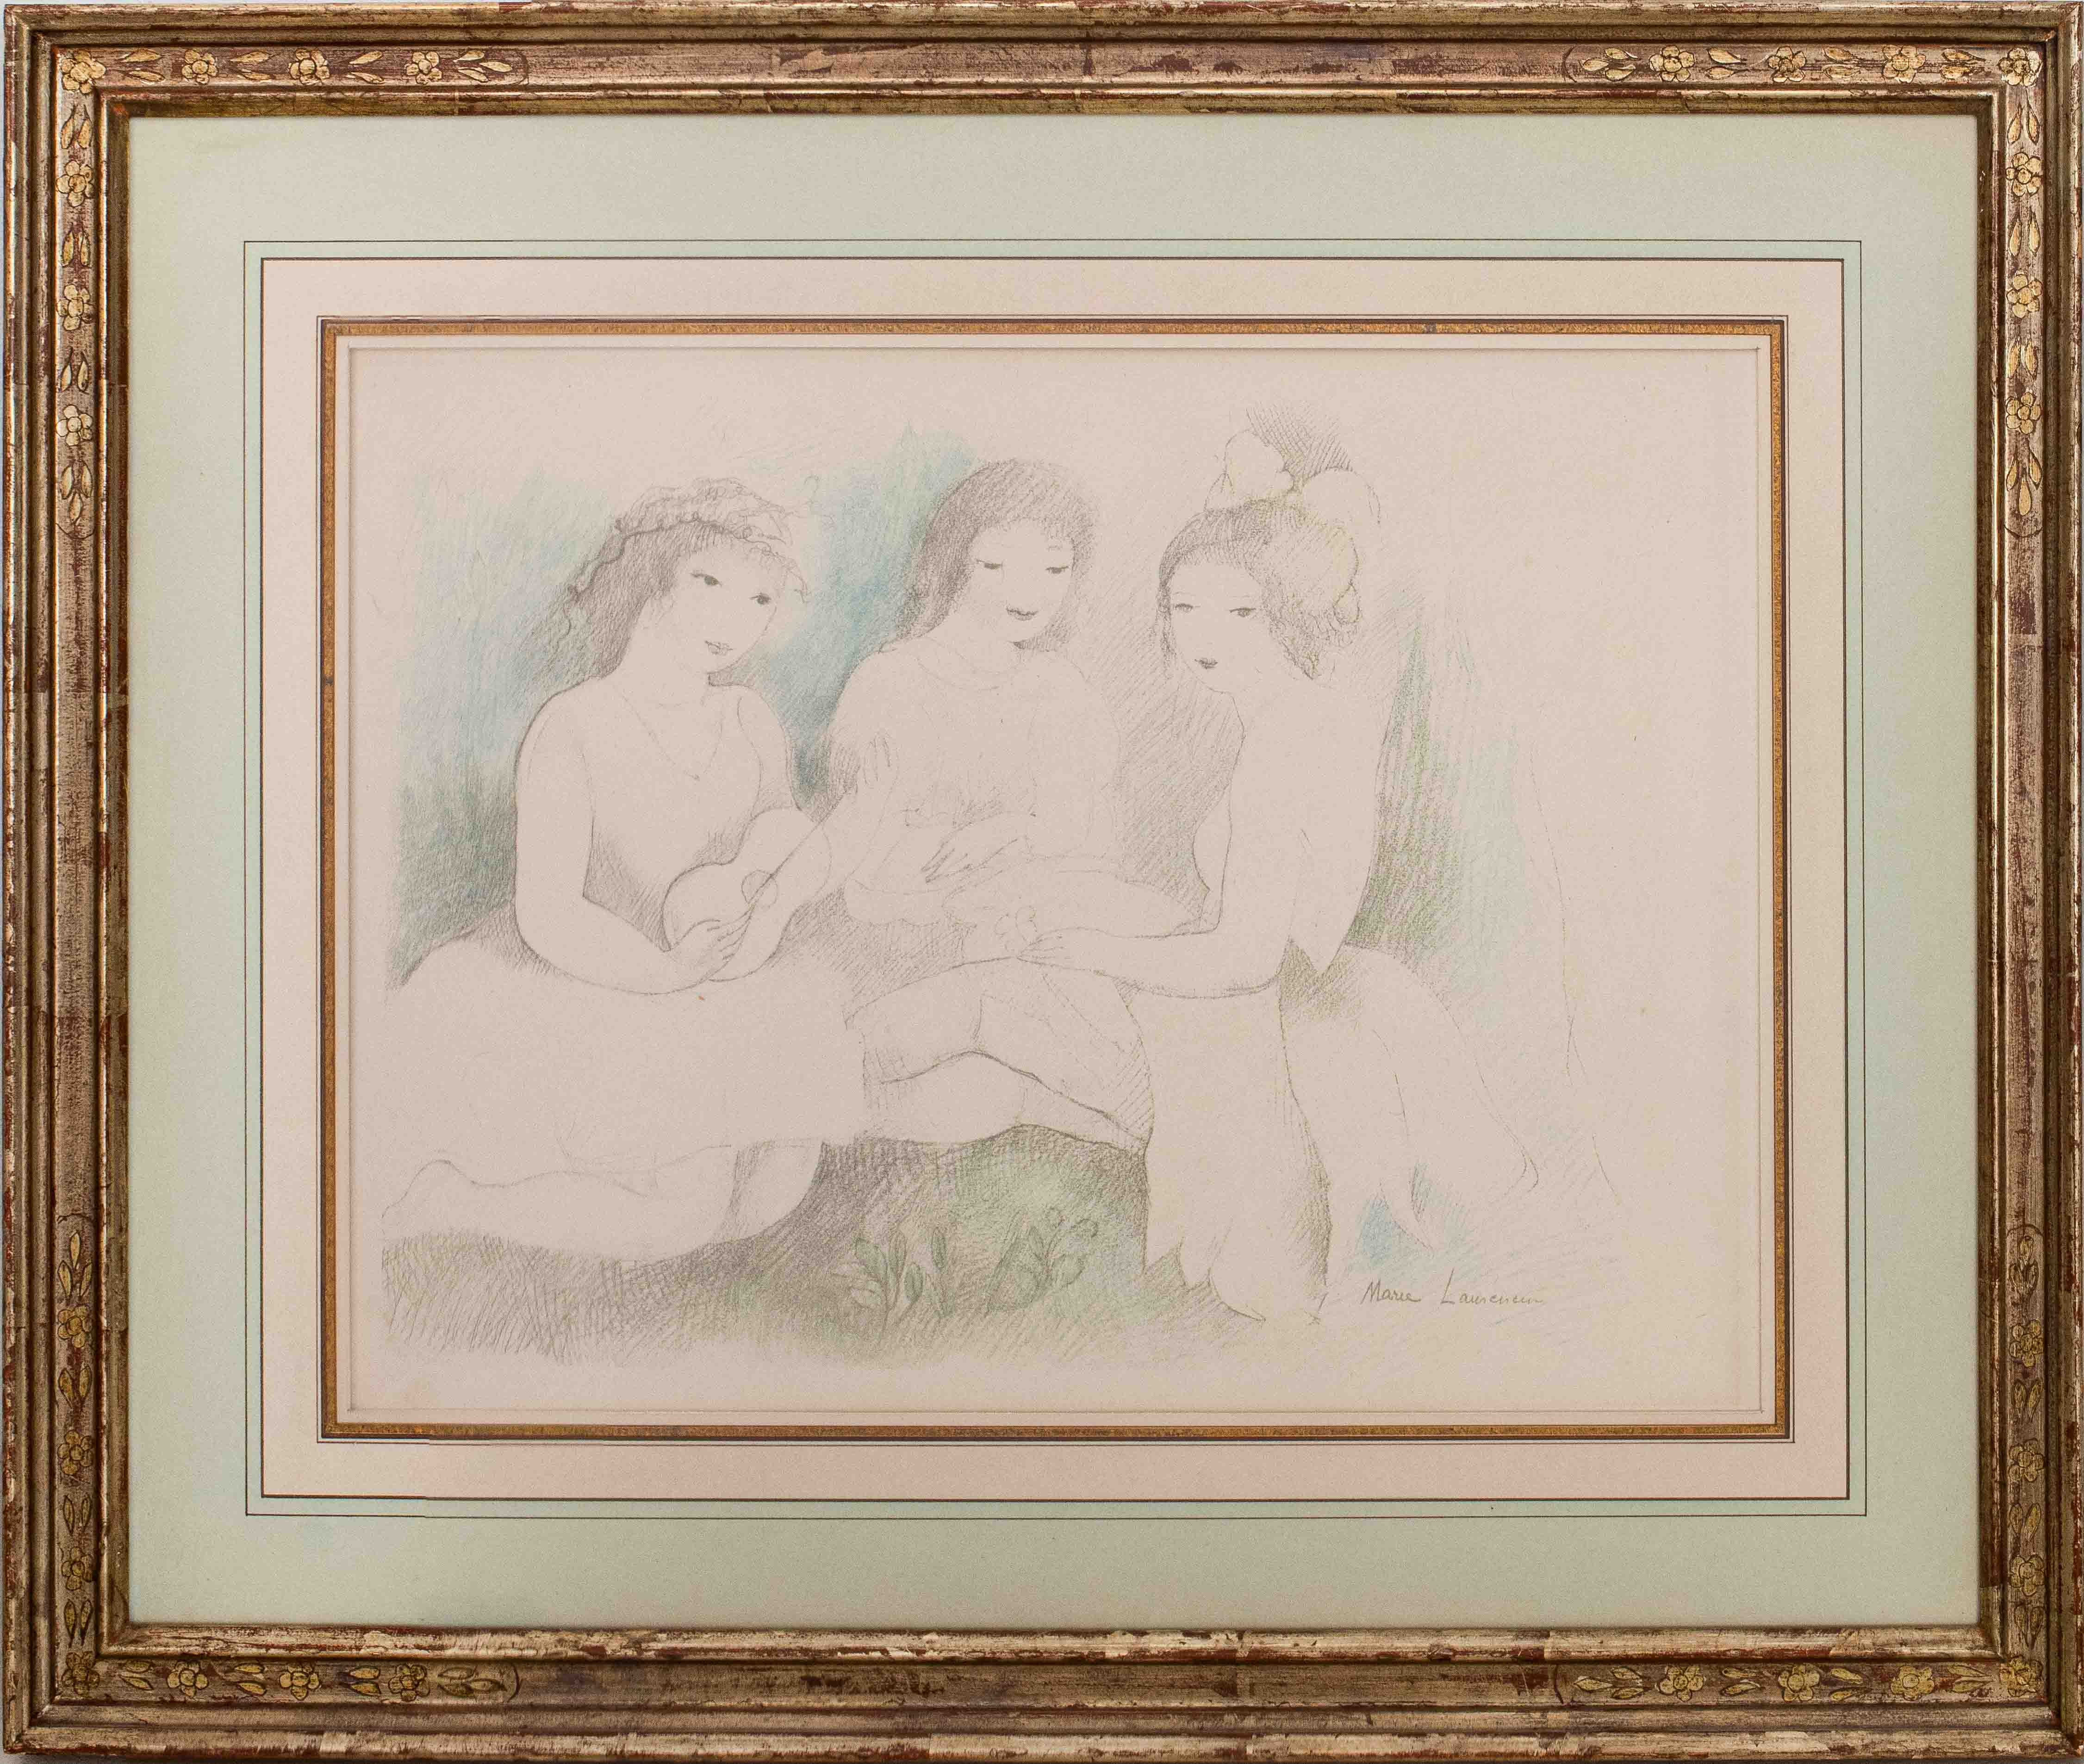 MARIE LAURENCIN LITHOGRAPH OF THREE 2d1d1f